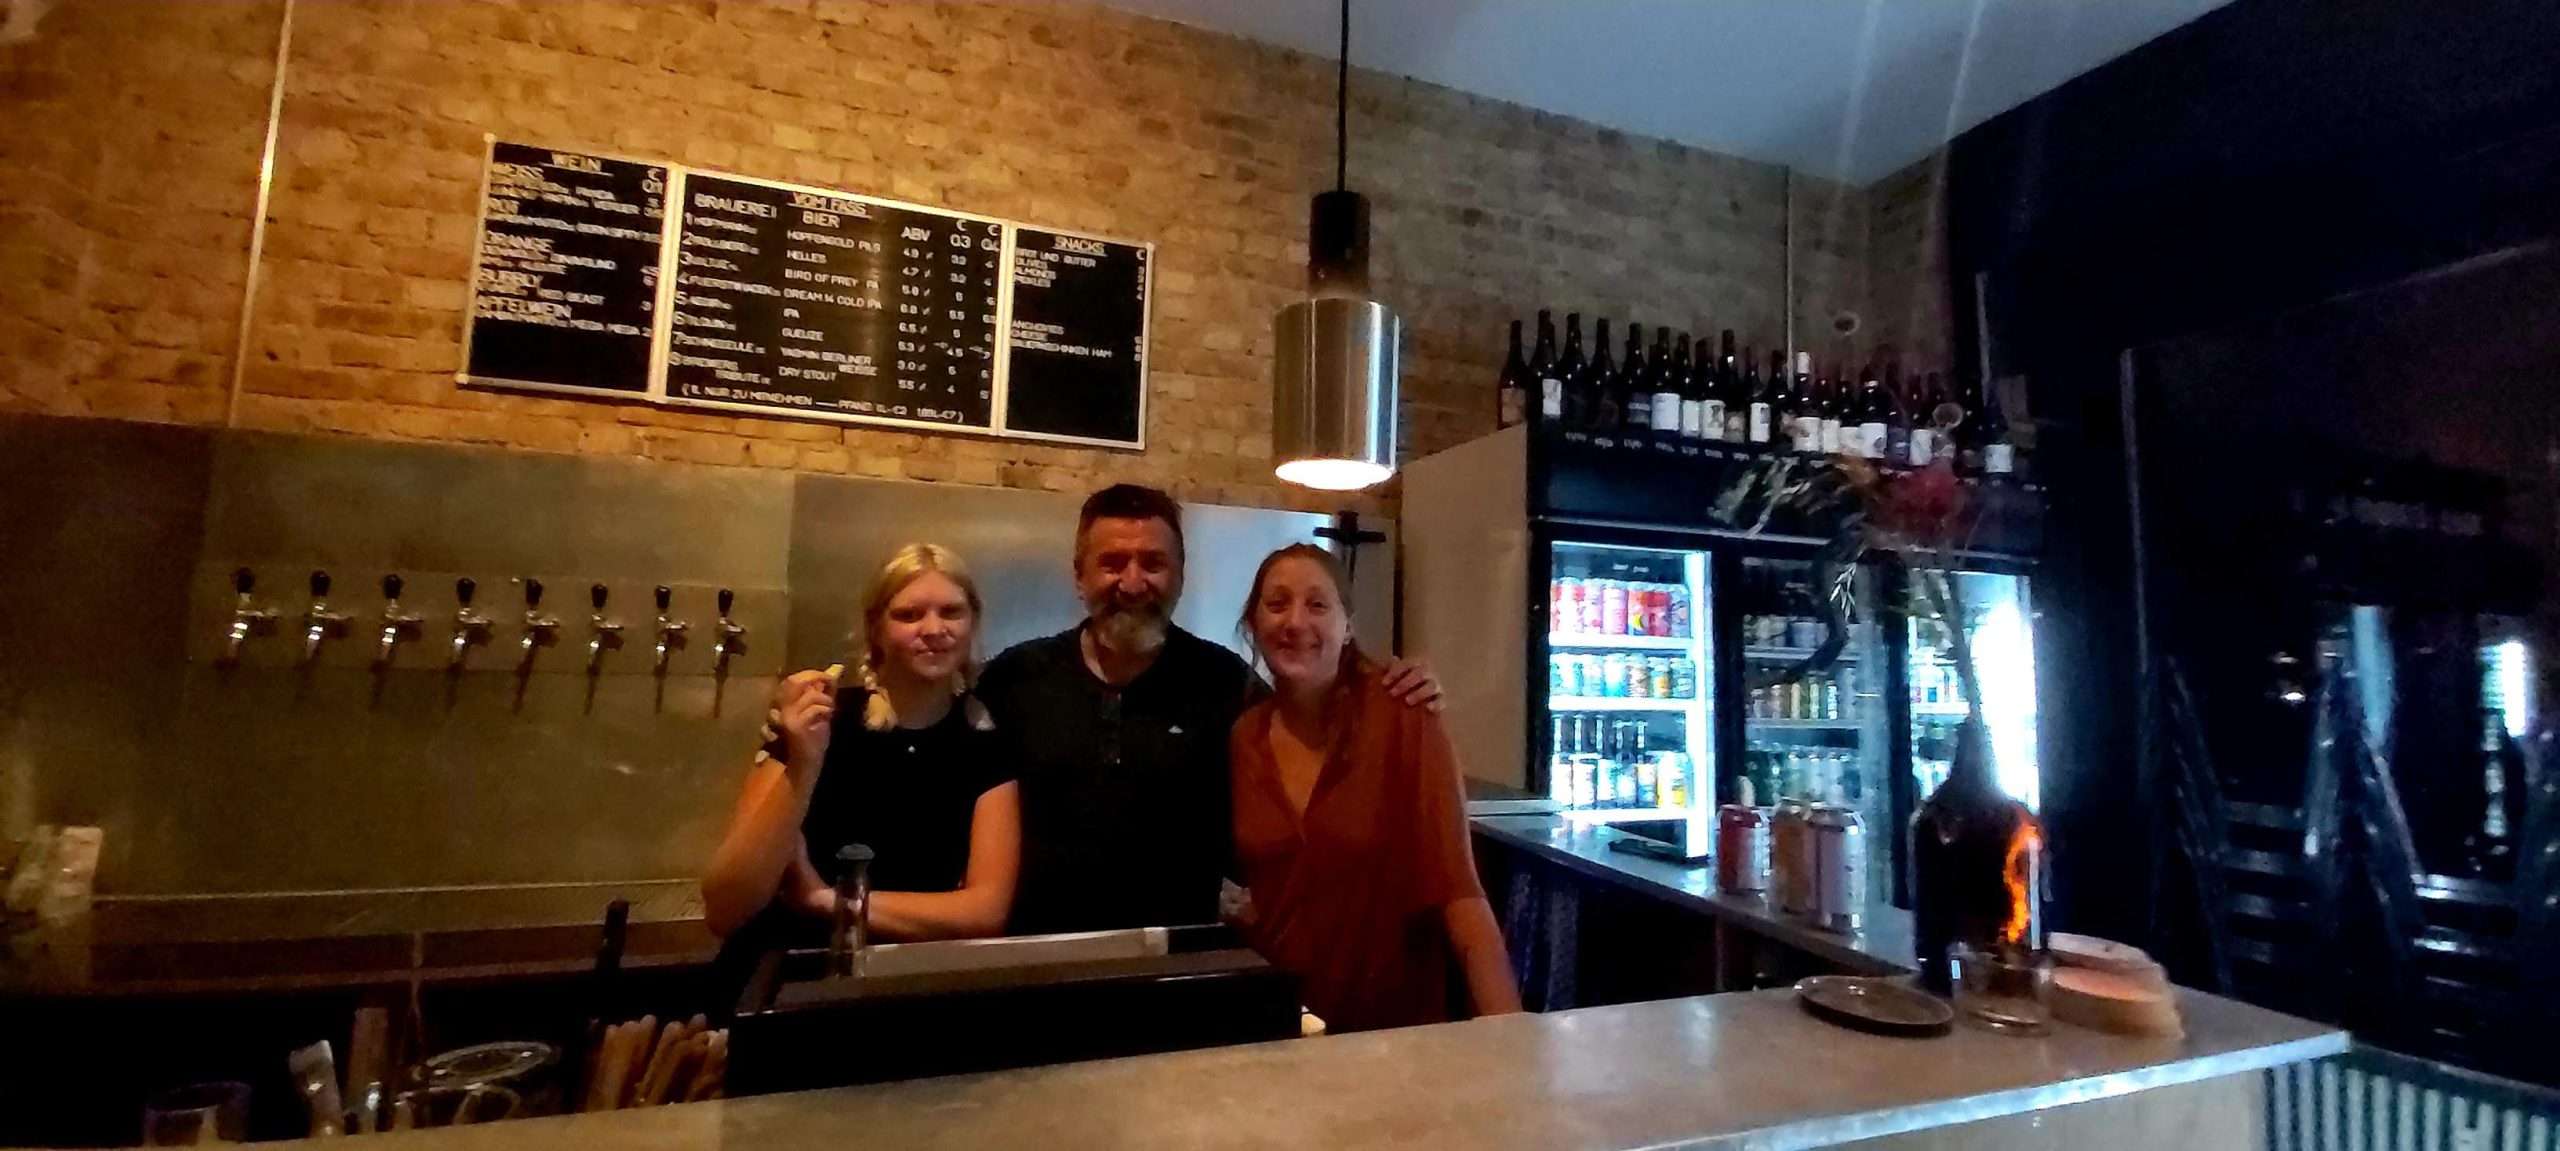 Three people behind thebar at Lager Lager craft beer bar in Berlin